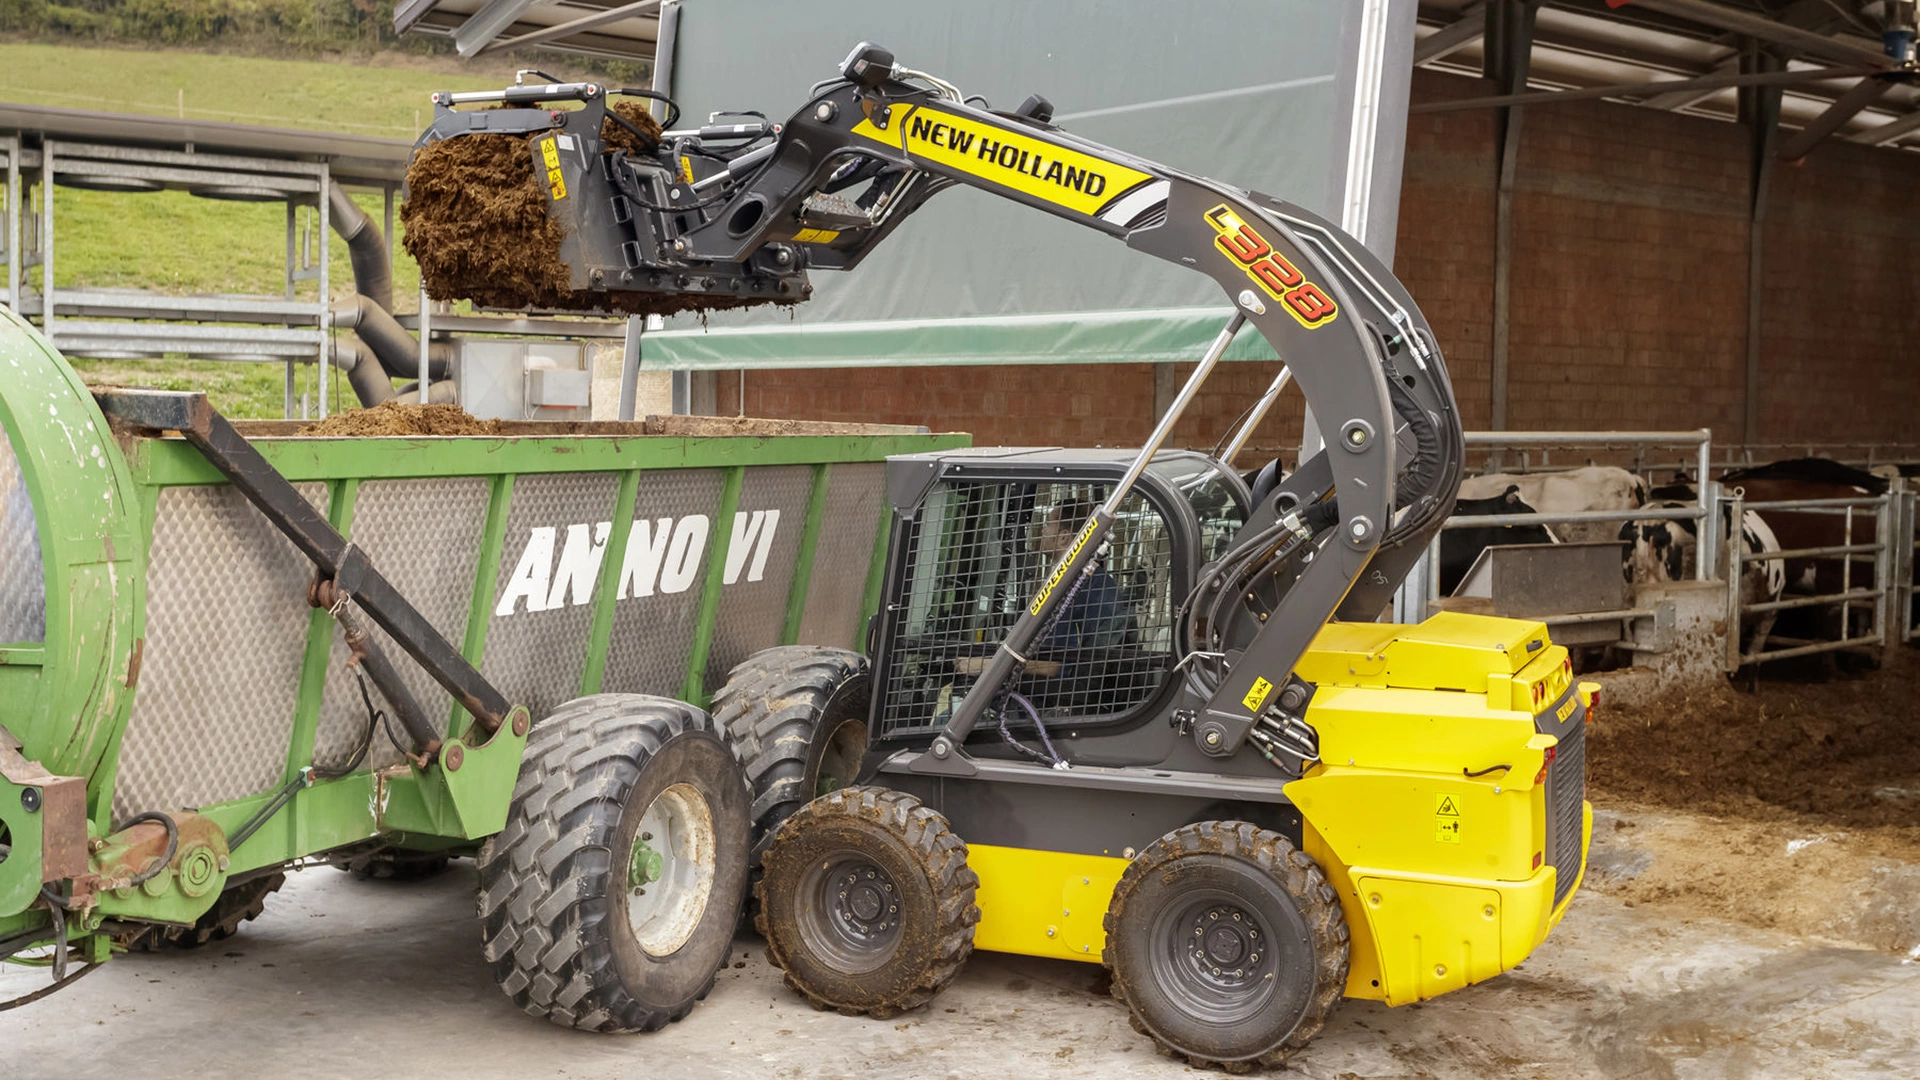 New Holland skid steer loader operating at a farm, lifting a load of material into a green trailer.